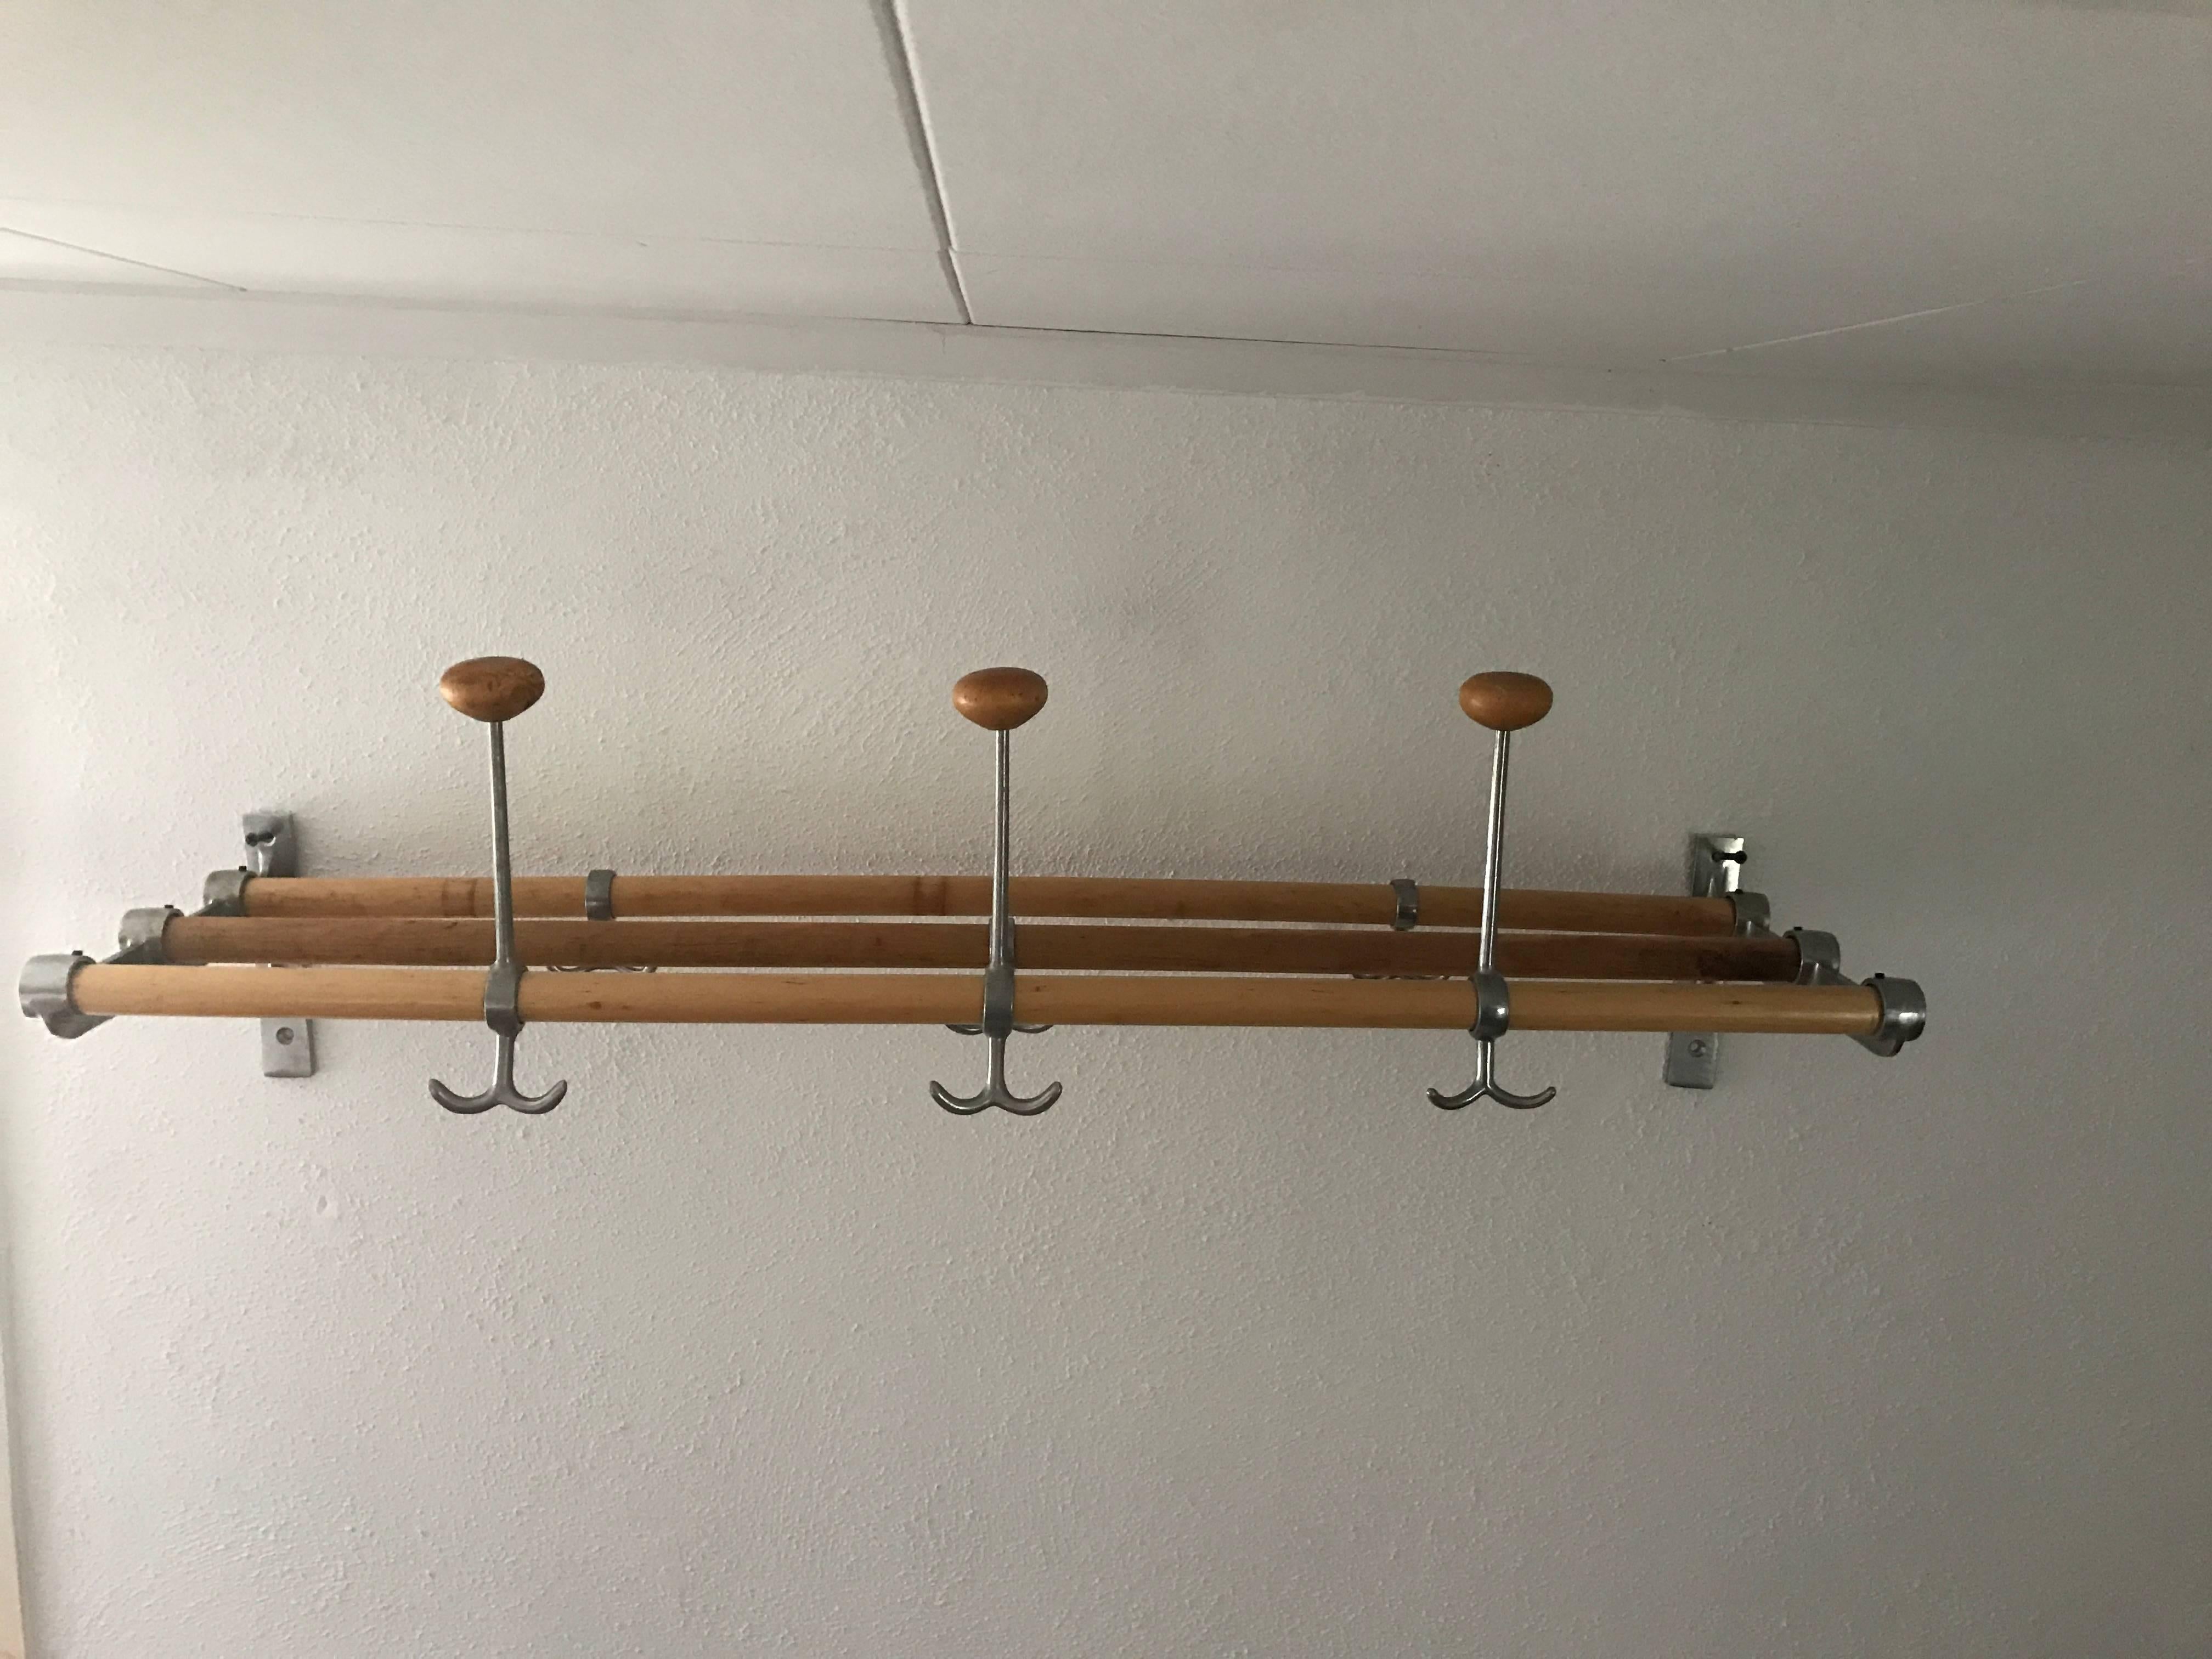 Mid-20th century Swedish Functionalistic coat and hat rack wall mount made of wood and brushed aluminum. This very nice rack is an icon of Swedish functionalism, with three hat pins with wooden finial. It is in a very nice condition, everything is